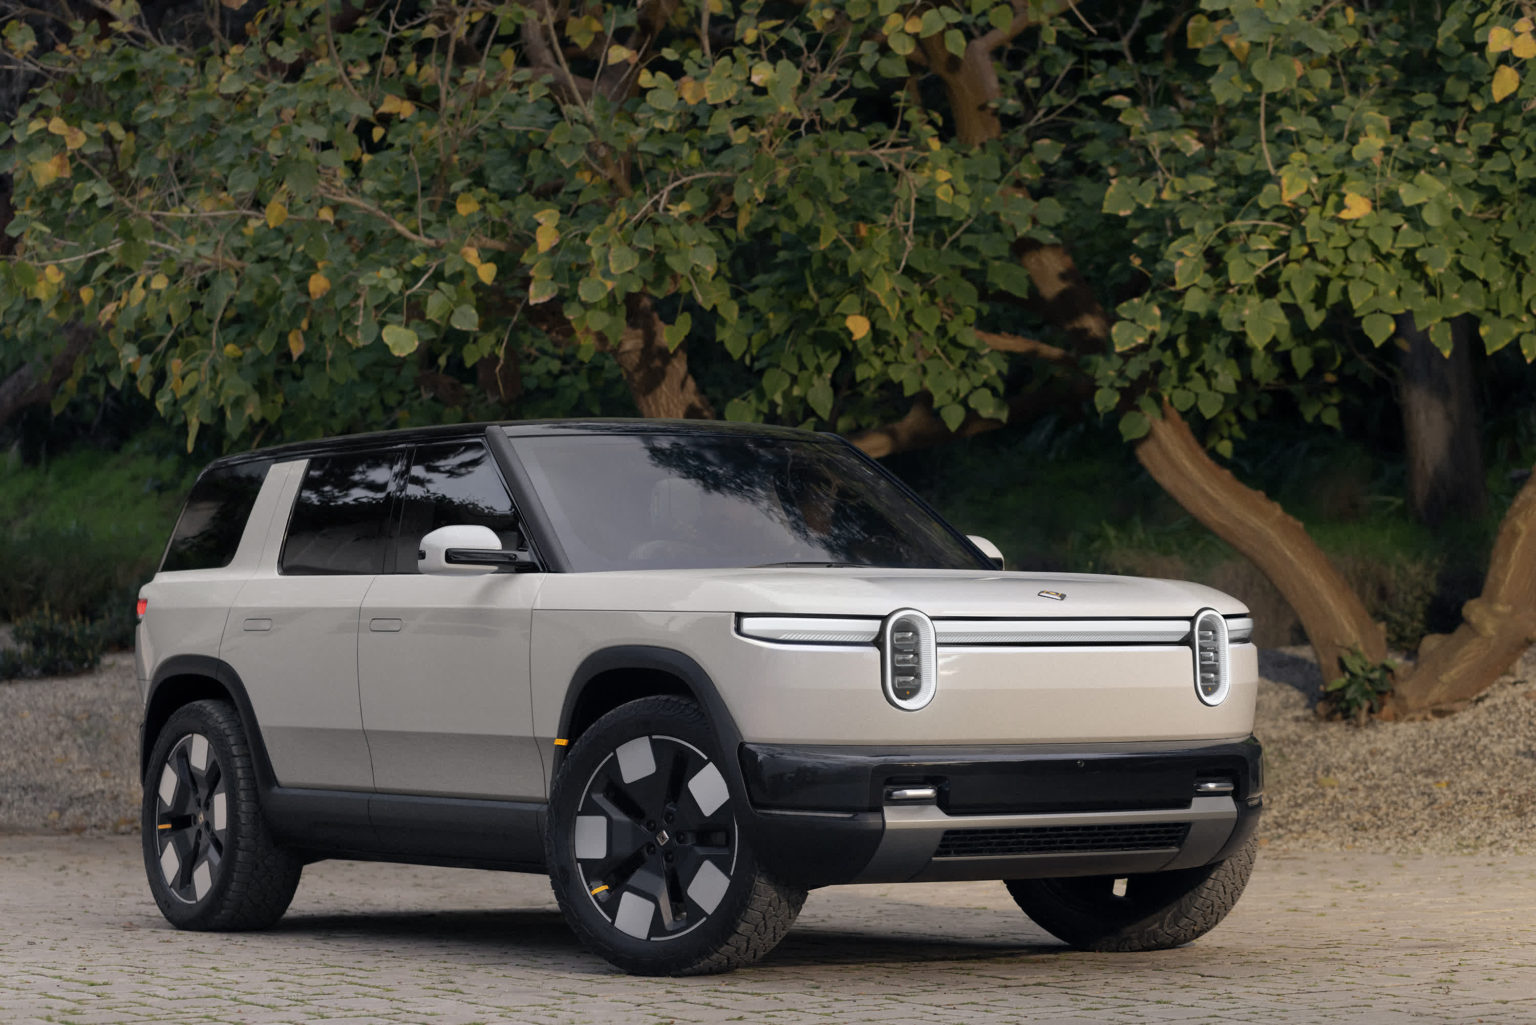 Rivian goes compact and affordable with $45K R2 SUV, surprises with R3 twins